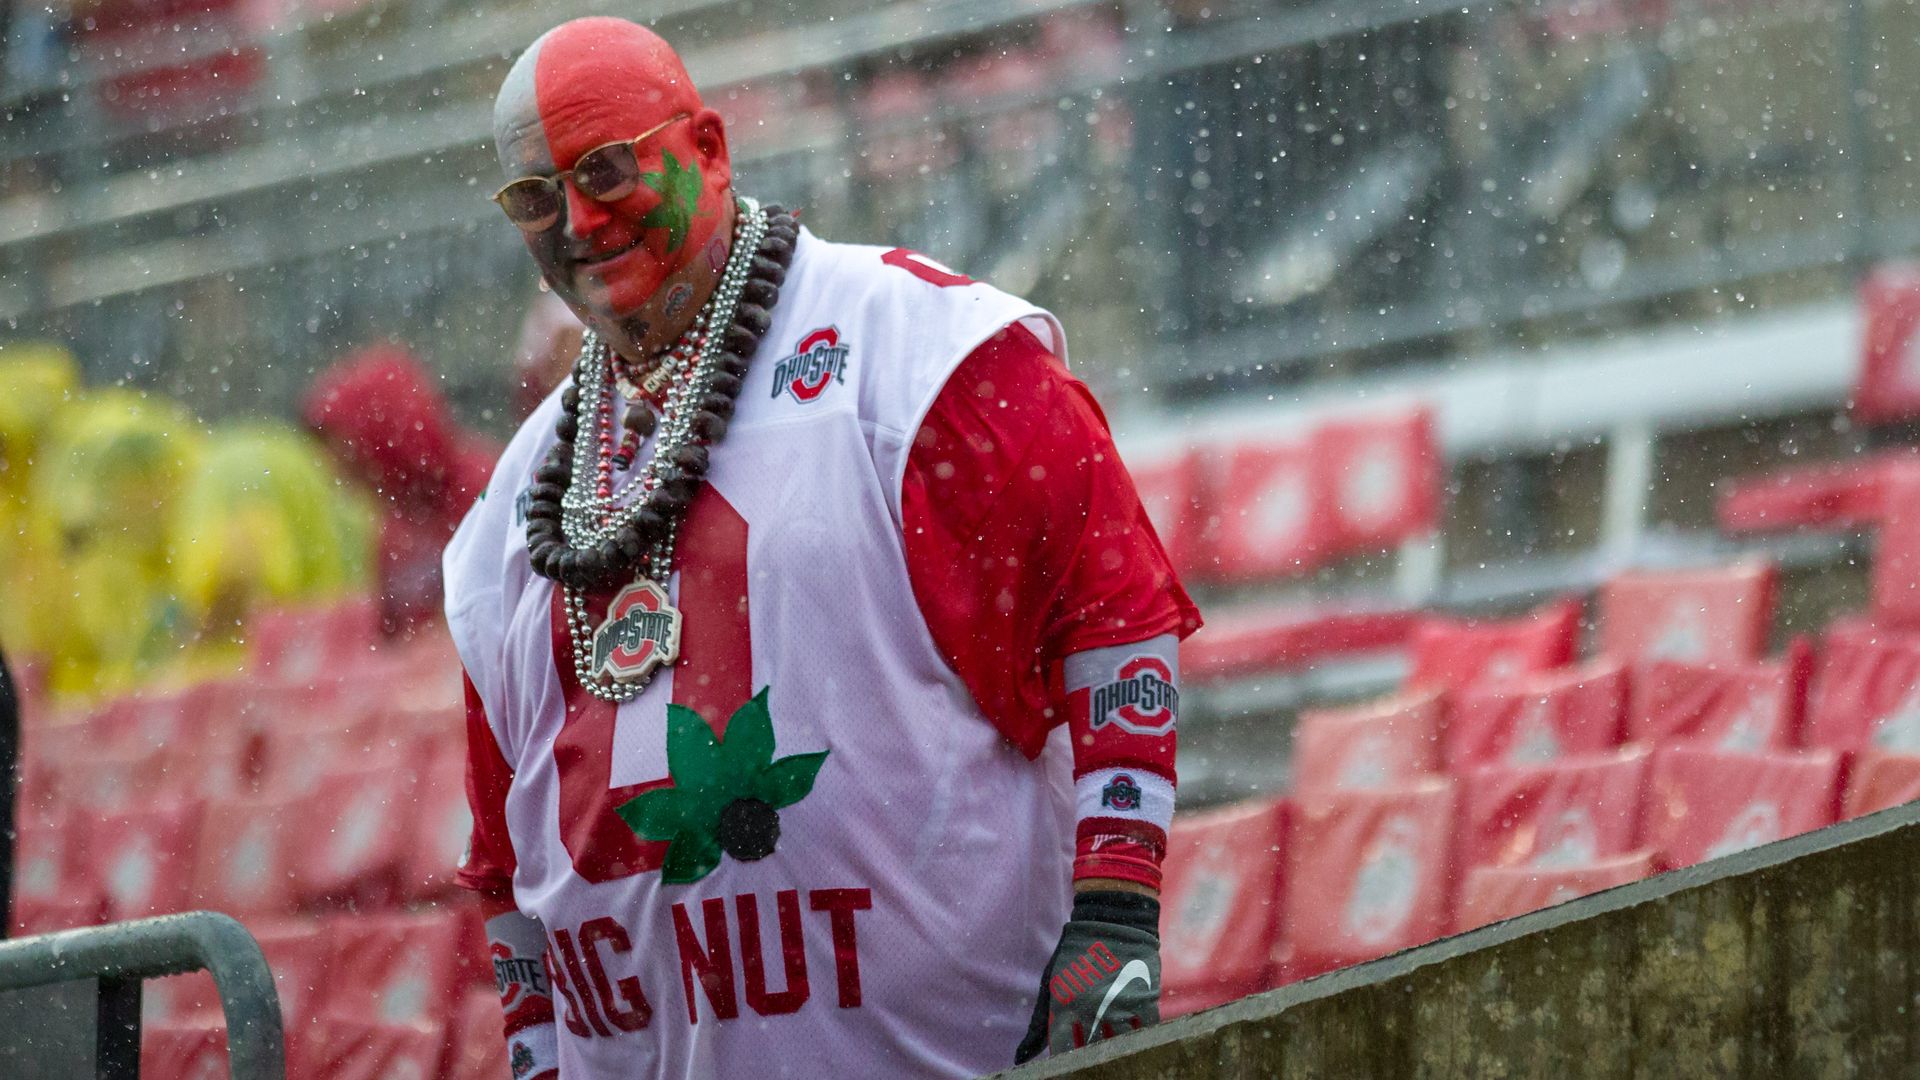 Ohio State football fan with scarlet and gray face paint, sunglasses and buckeye necklaces. 